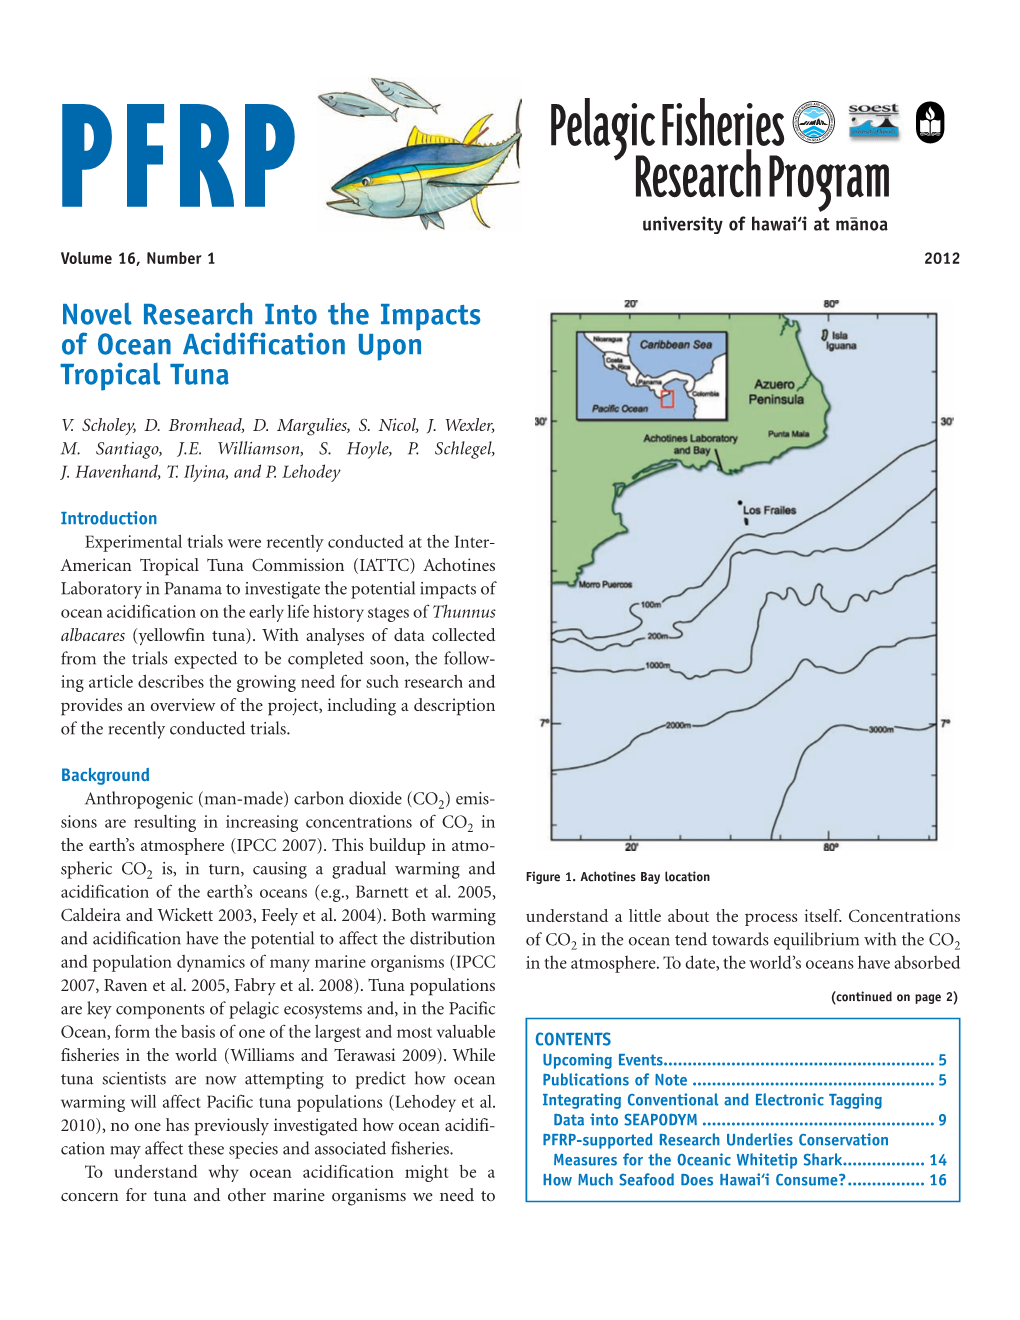 Novel Research Into the Impacts of Ocean Acidification Upon Tropical Tuna